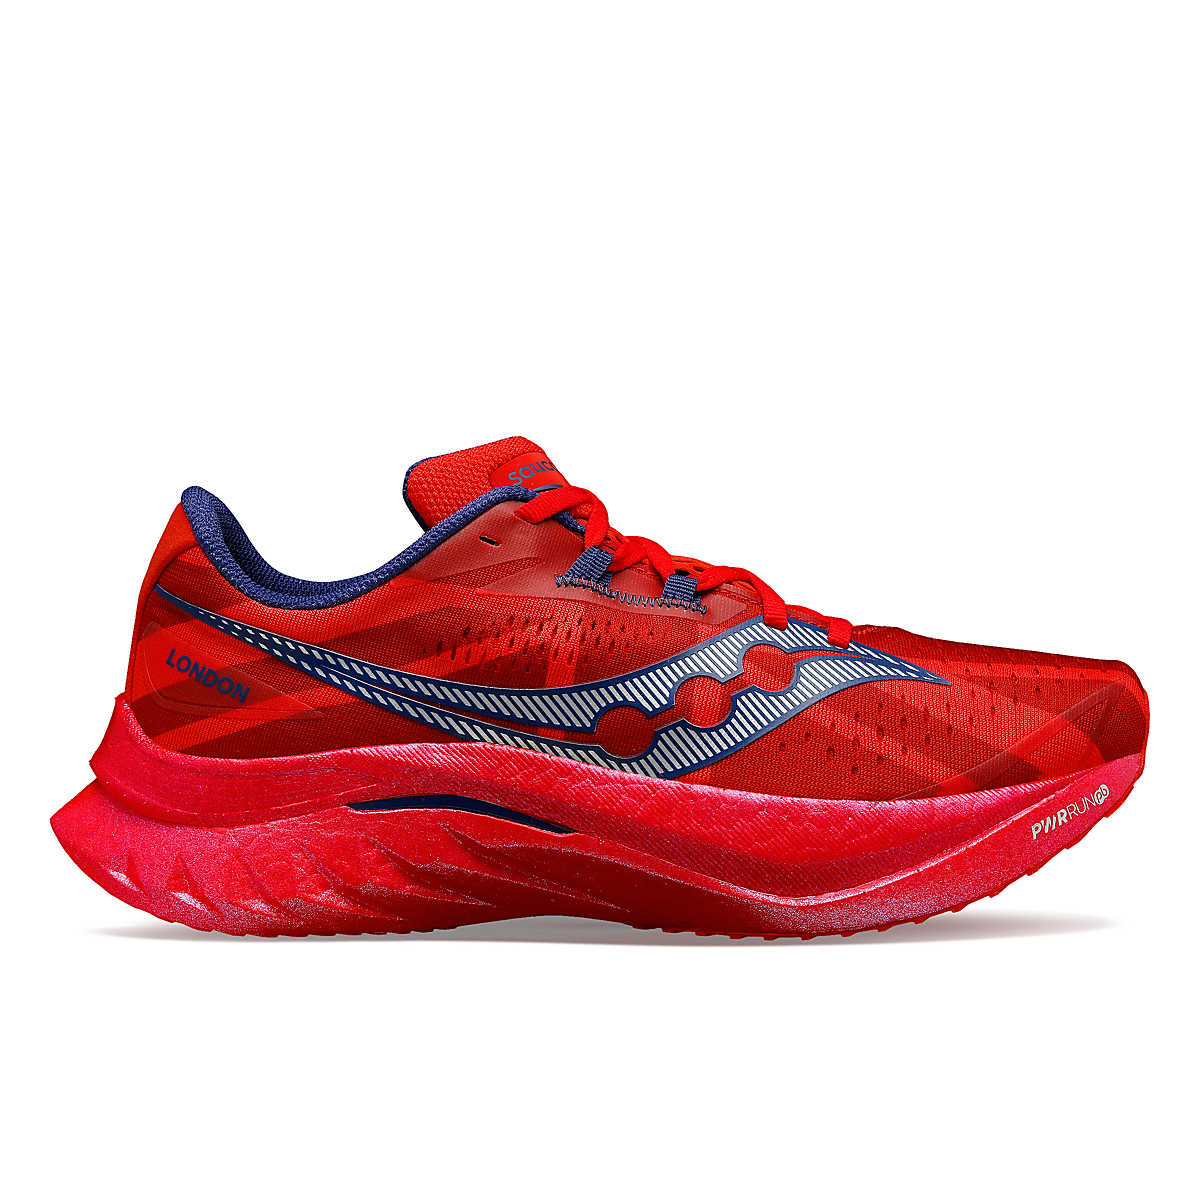 London Endorphin Speed 4, Red, dynamic 1